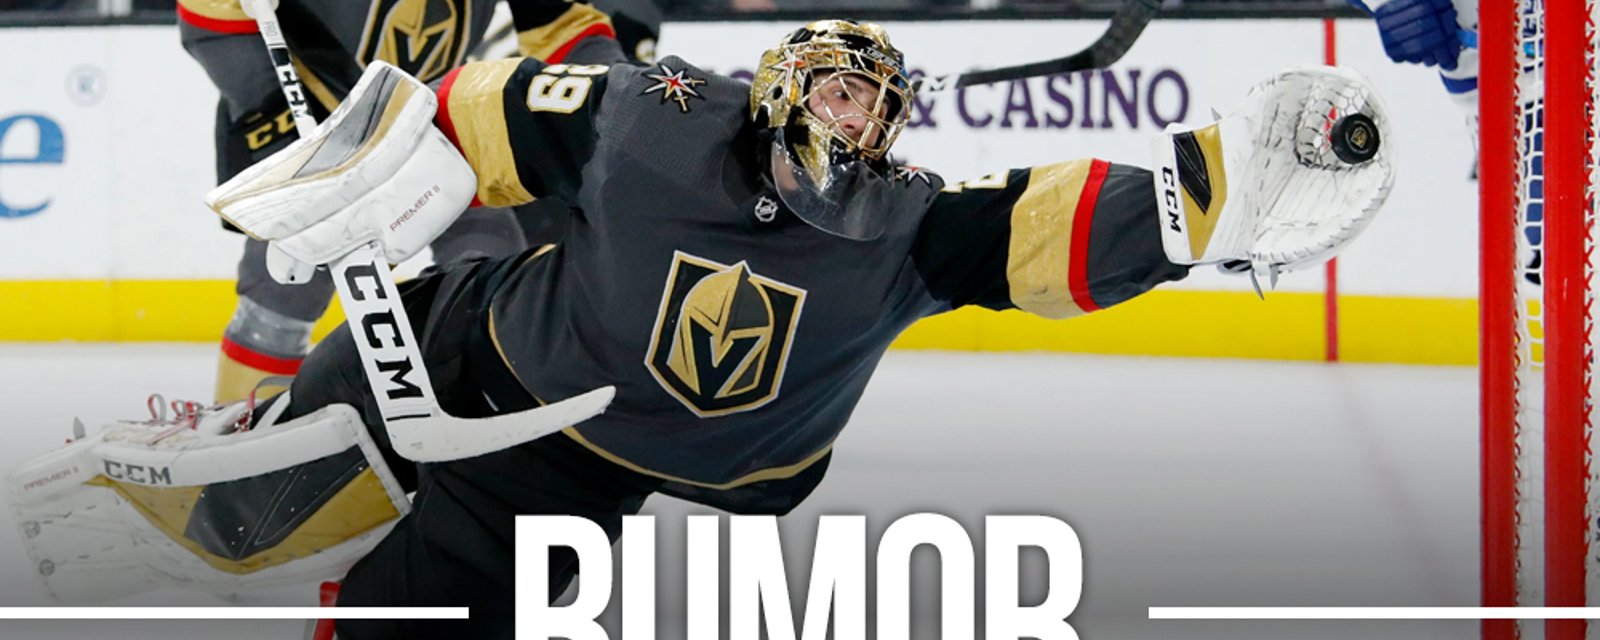 Change of plans for Fleury in Vegas?